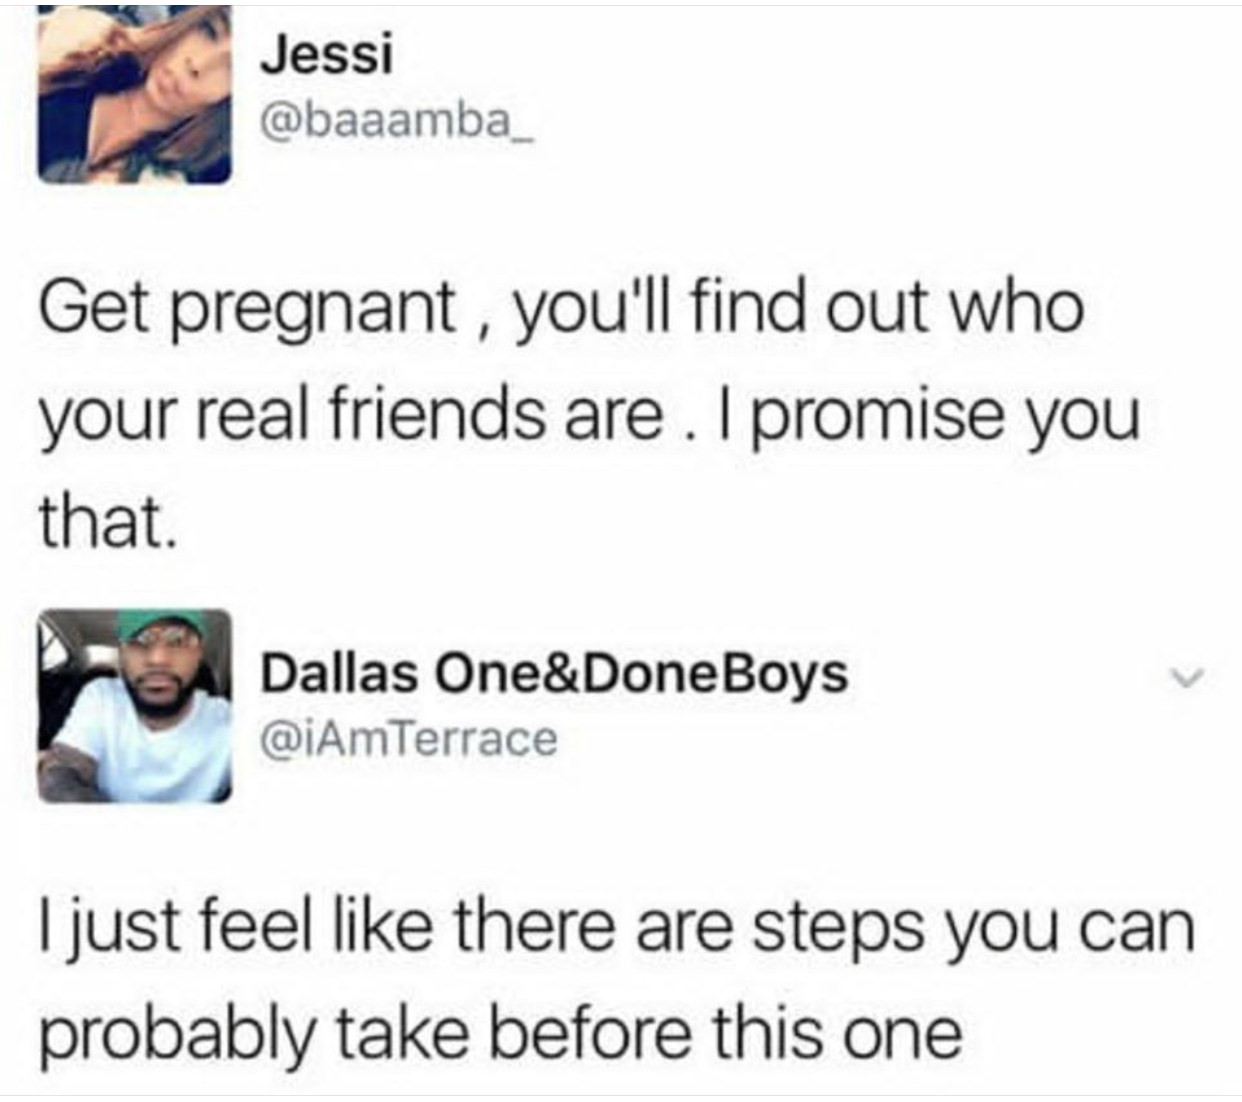 human behavior - Jessi Get pregnant, you'll find out who your real friends are. I promise you that. Dallas One&Done Boys I just feel there are steps you can probably take before this one